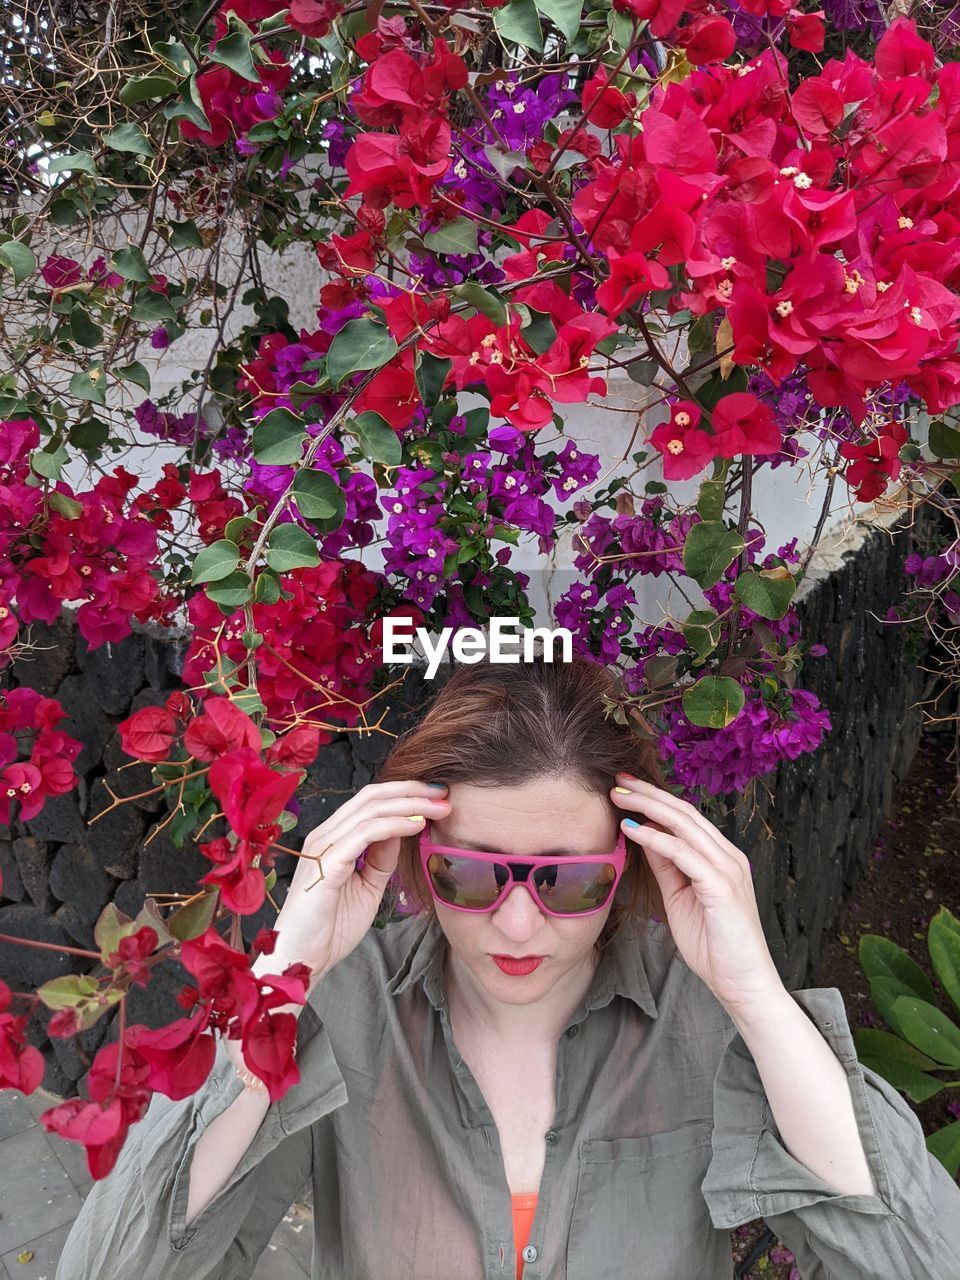 plant, one person, flower, spring, flowering plant, glasses, portrait, front view, women, nature, fashion, beauty in nature, pink, young adult, sunglasses, adult, looking at camera, leisure activity, lifestyles, outdoors, day, red, fragility, freshness, headshot, clothing, standing, female, growth, floristry, leaf, eyeglasses, hairstyle, waist up, smiling, plant part, autumn